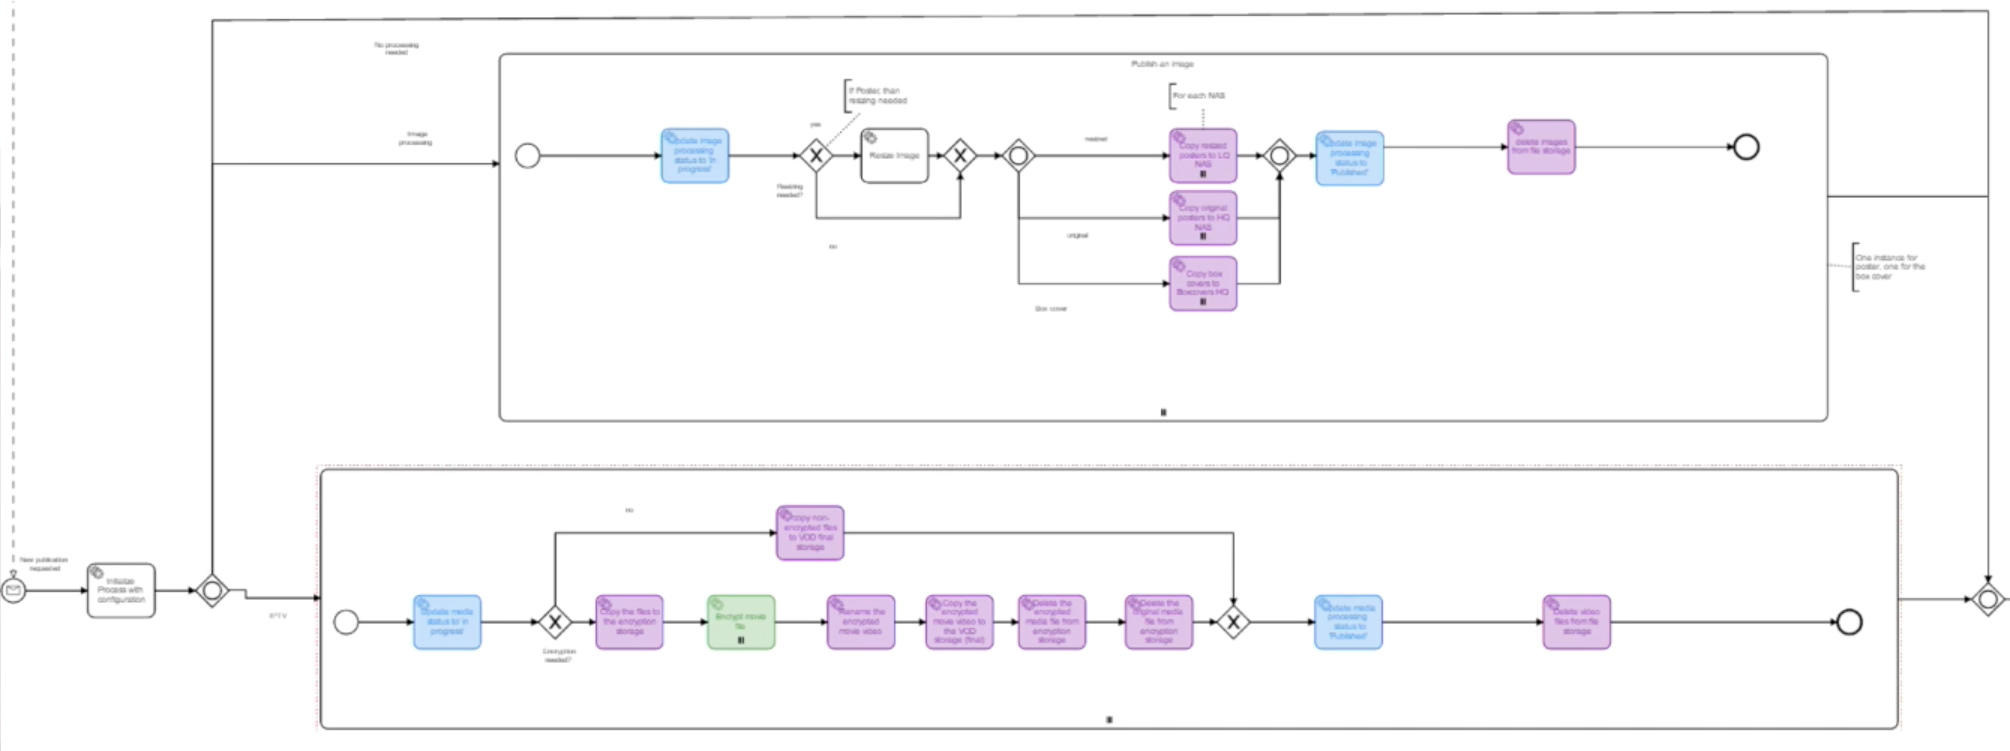 Mediagenix BPMN workflow for microservices orchestration